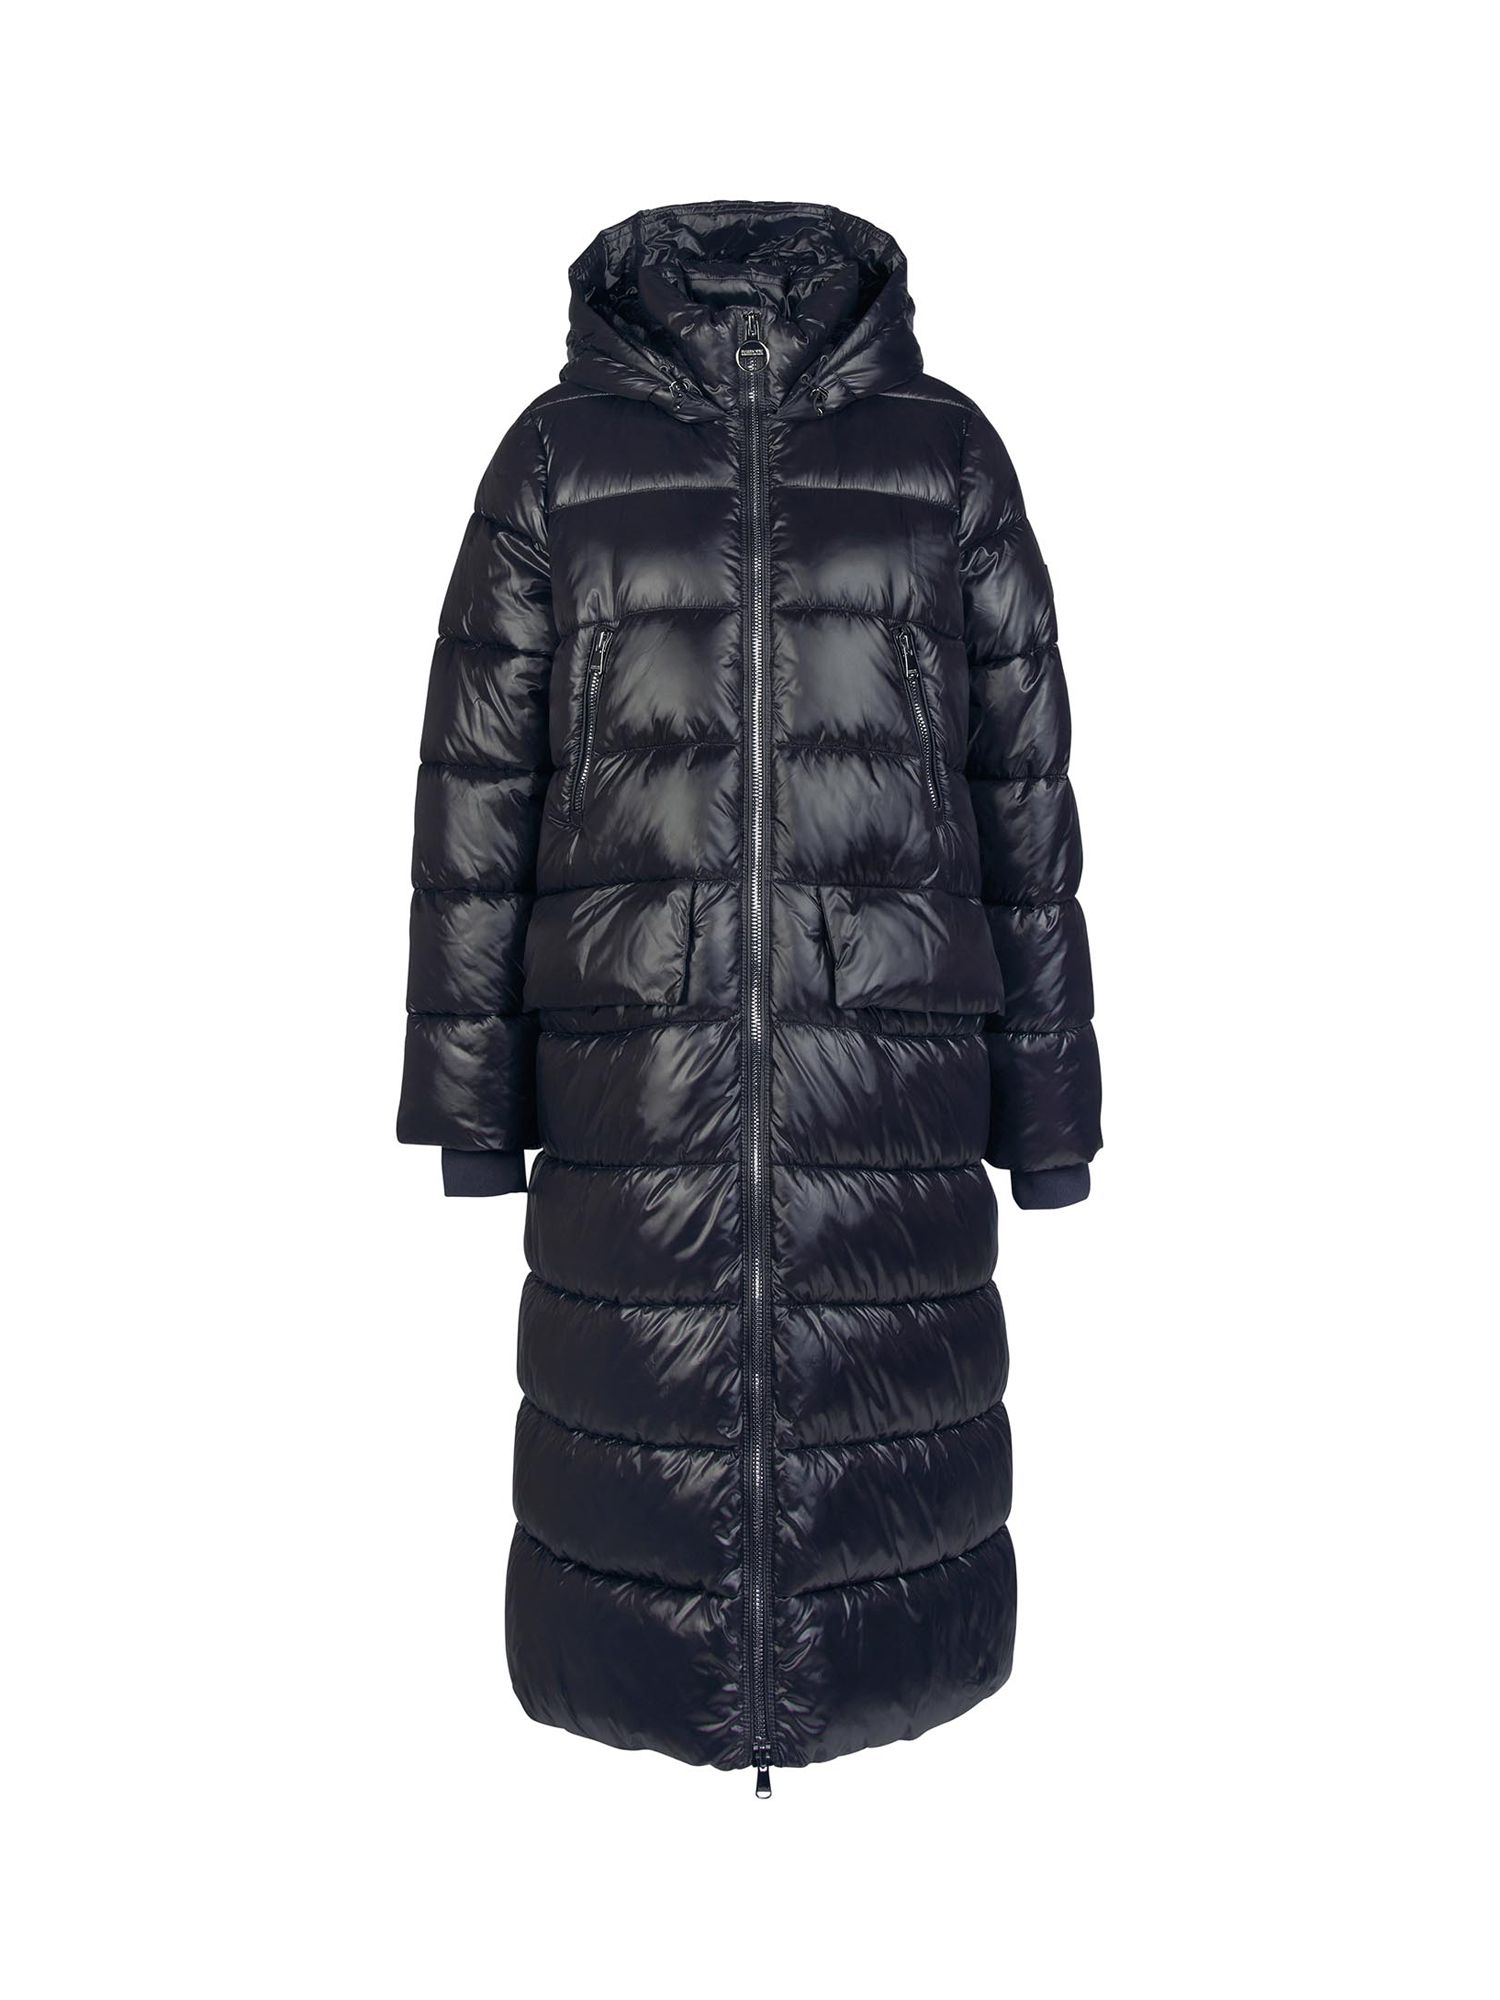 Barbour International London Longline Quilted Coat